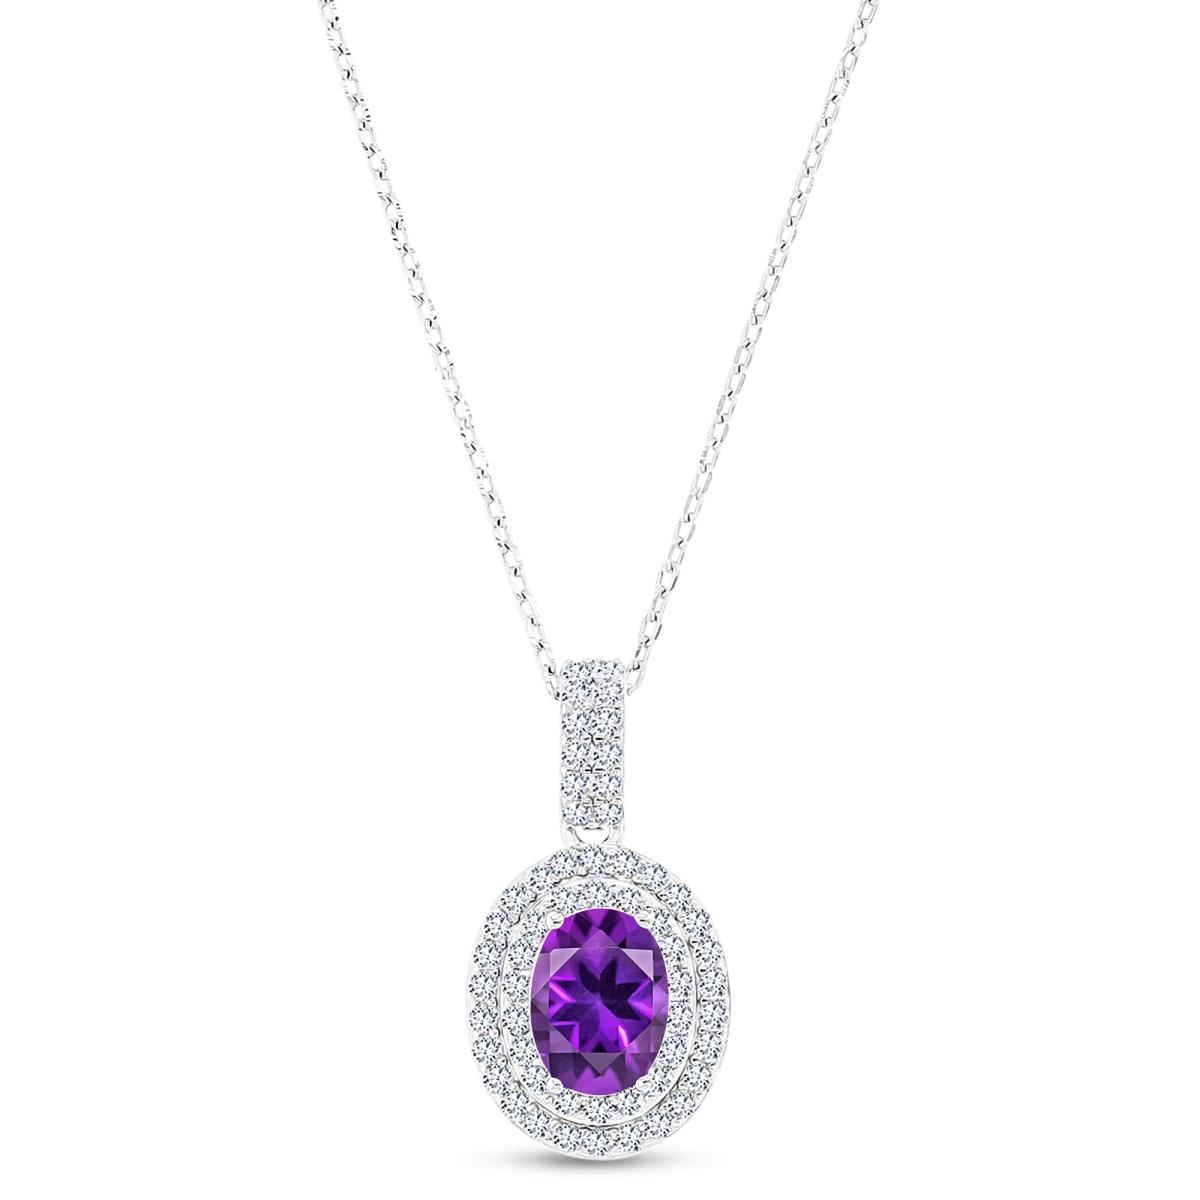 Sterling Silver Rhodium 8x6mm Oval Amethyst & Cr White Sapphire Halo 16"+2" Necklace